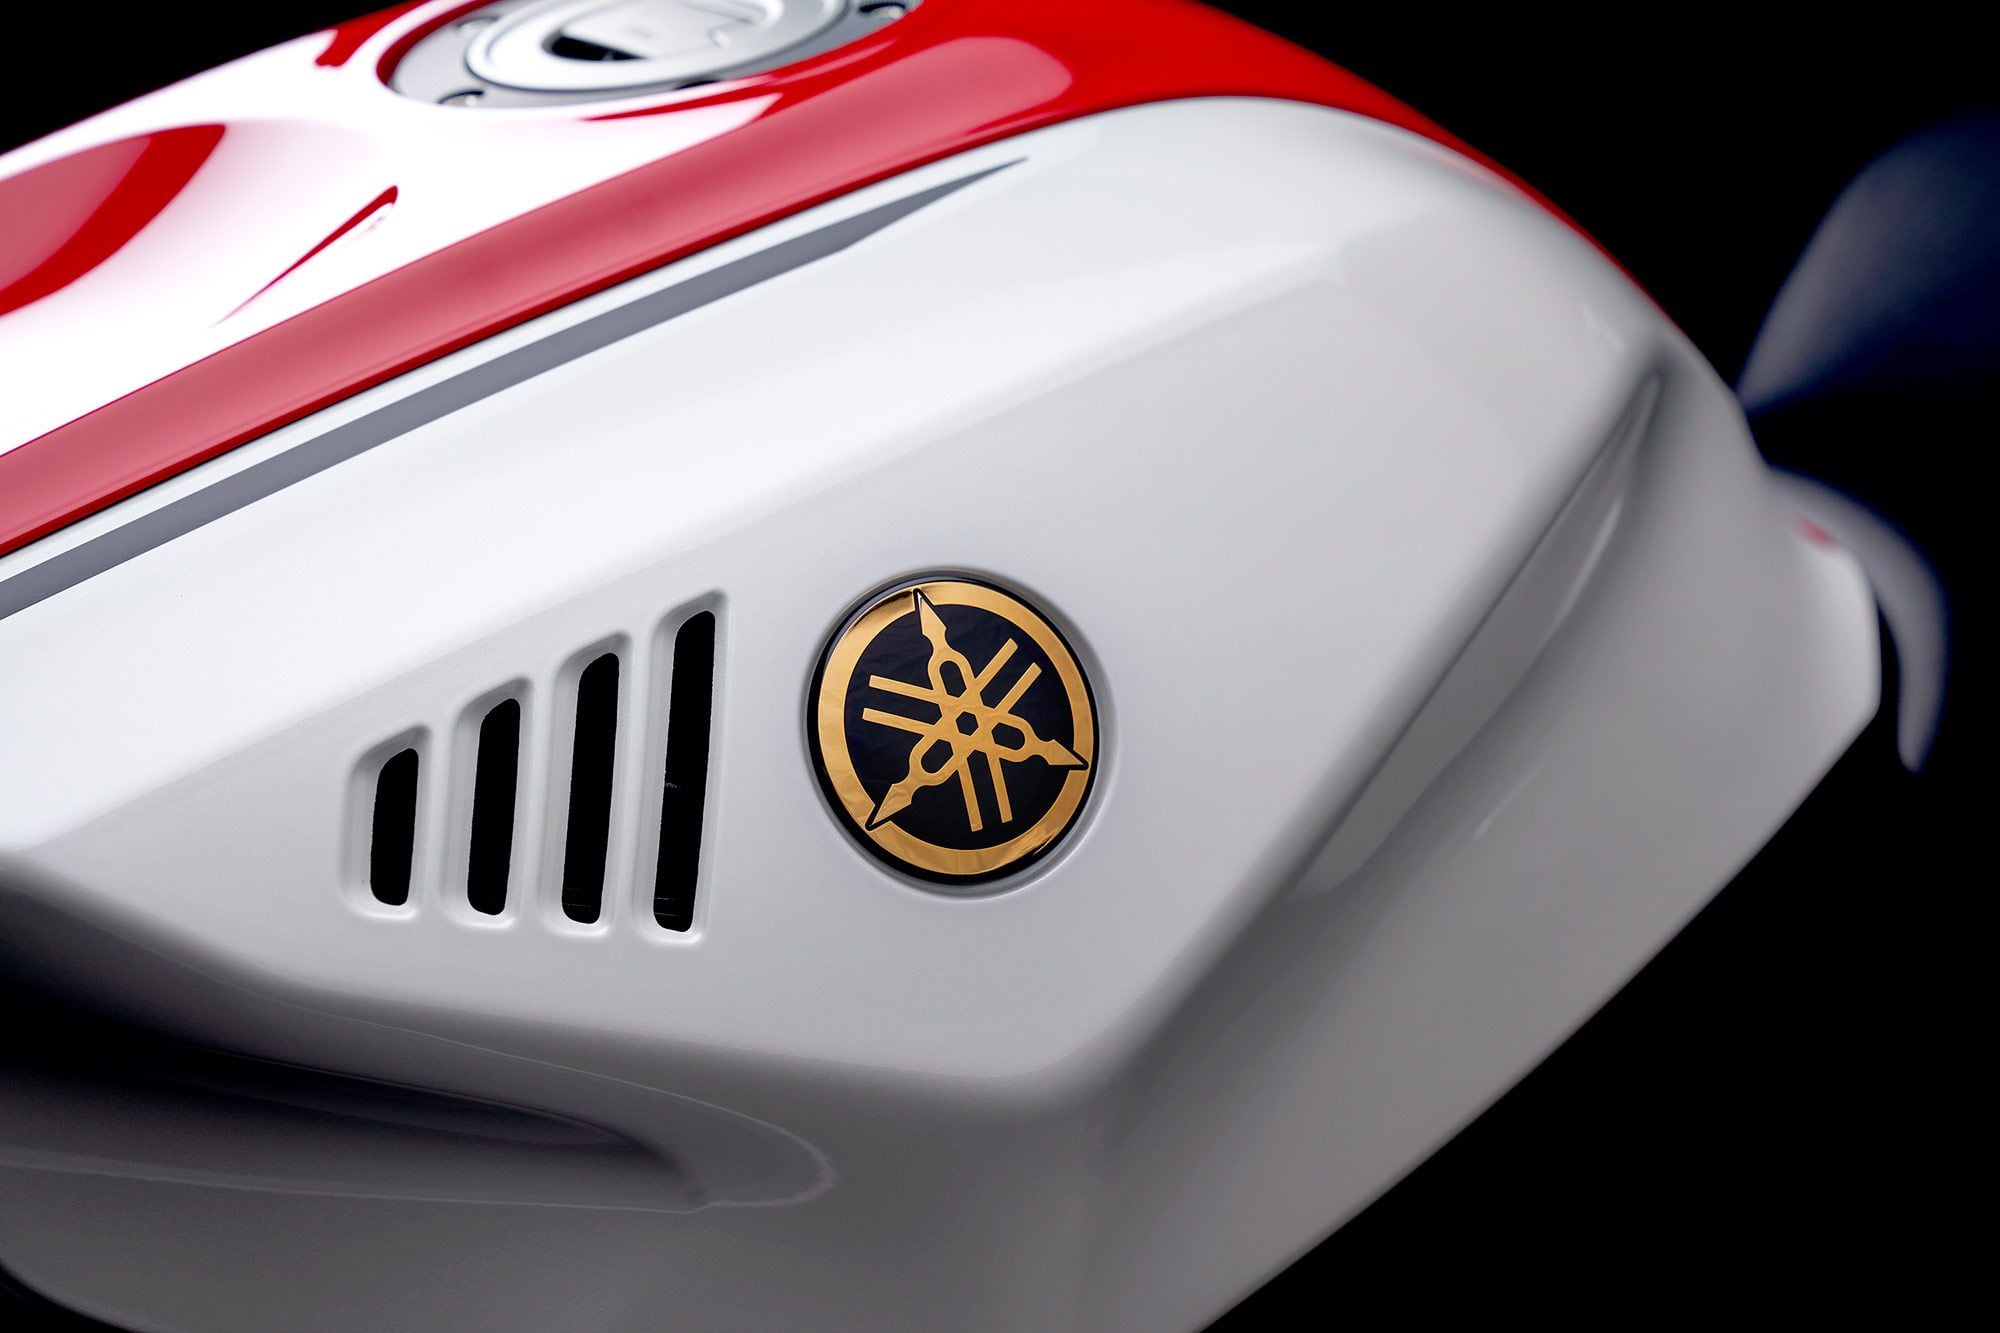 In a nod to Yamaha’s GP team, each anniversary edition will feature GP-inspired Tuning Fork emblems.